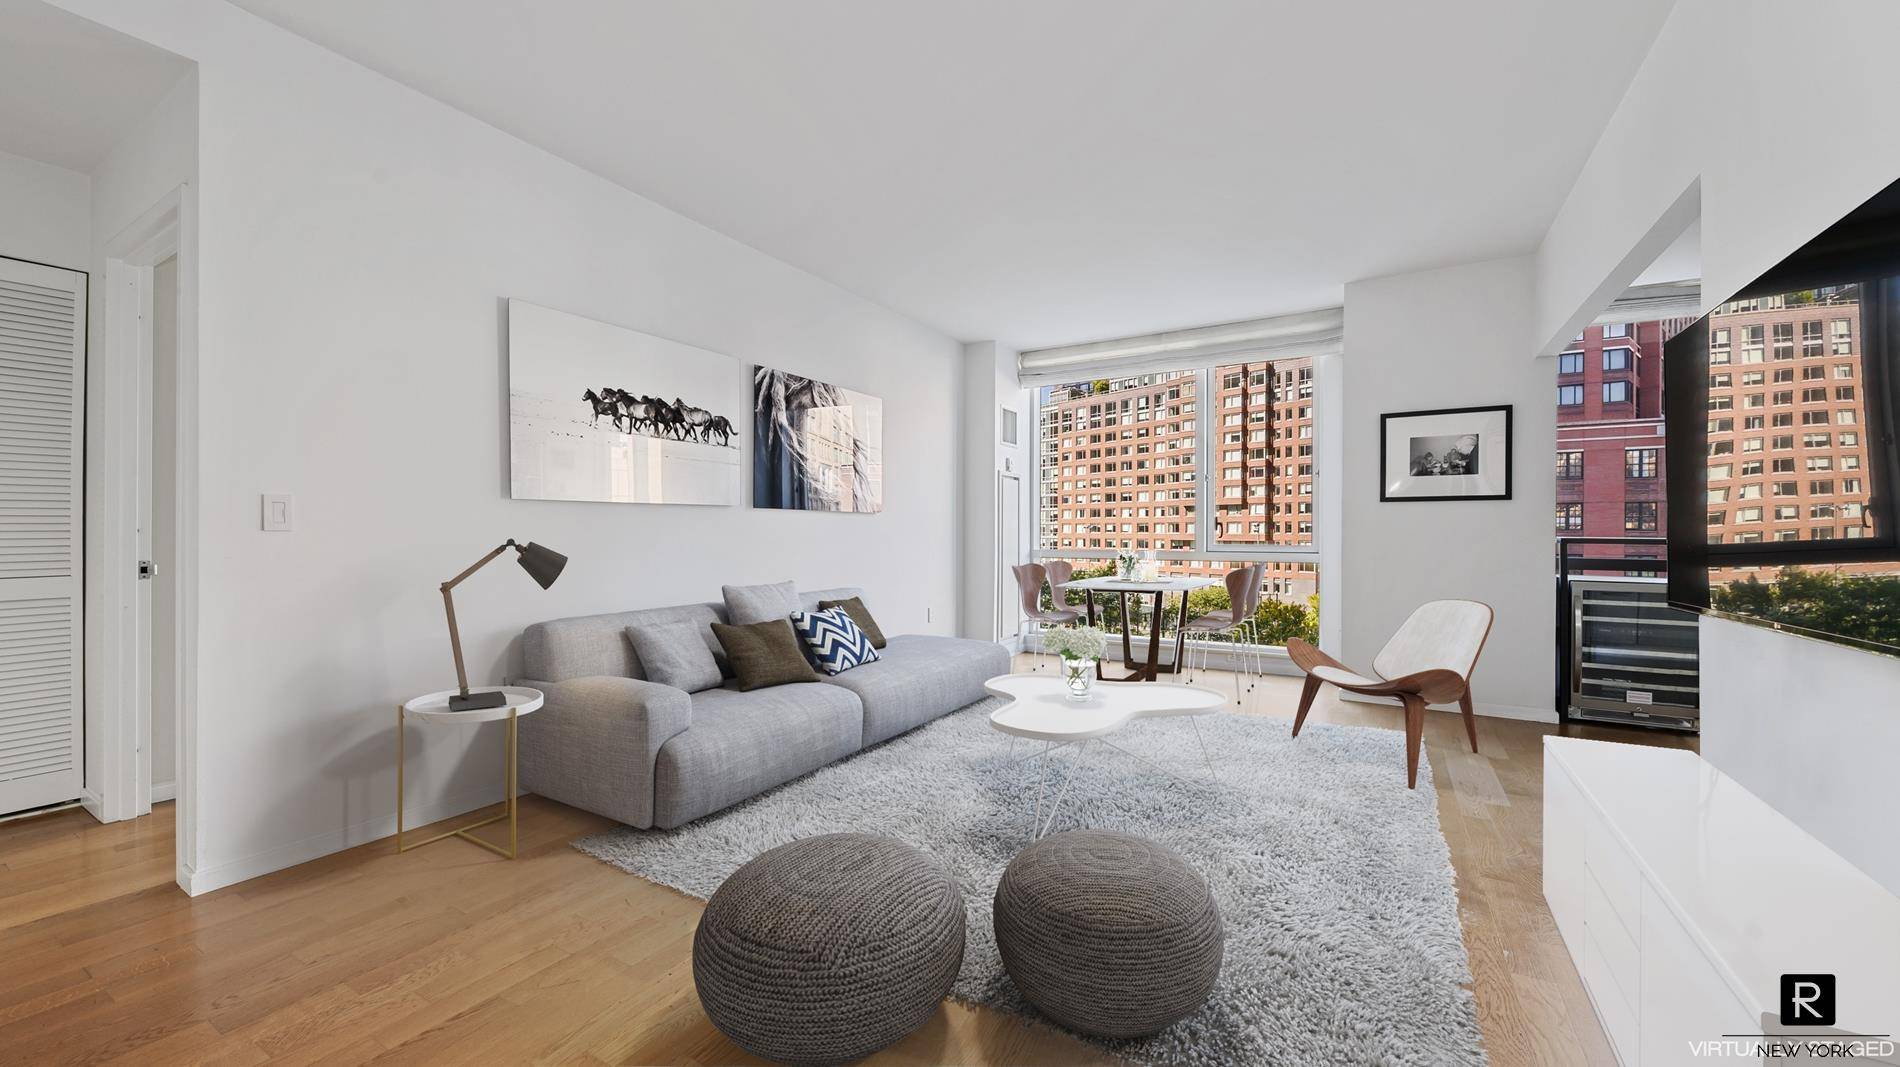 Perched above the trees is this quintessential two bedroom, two bathroom in prime Tribeca.